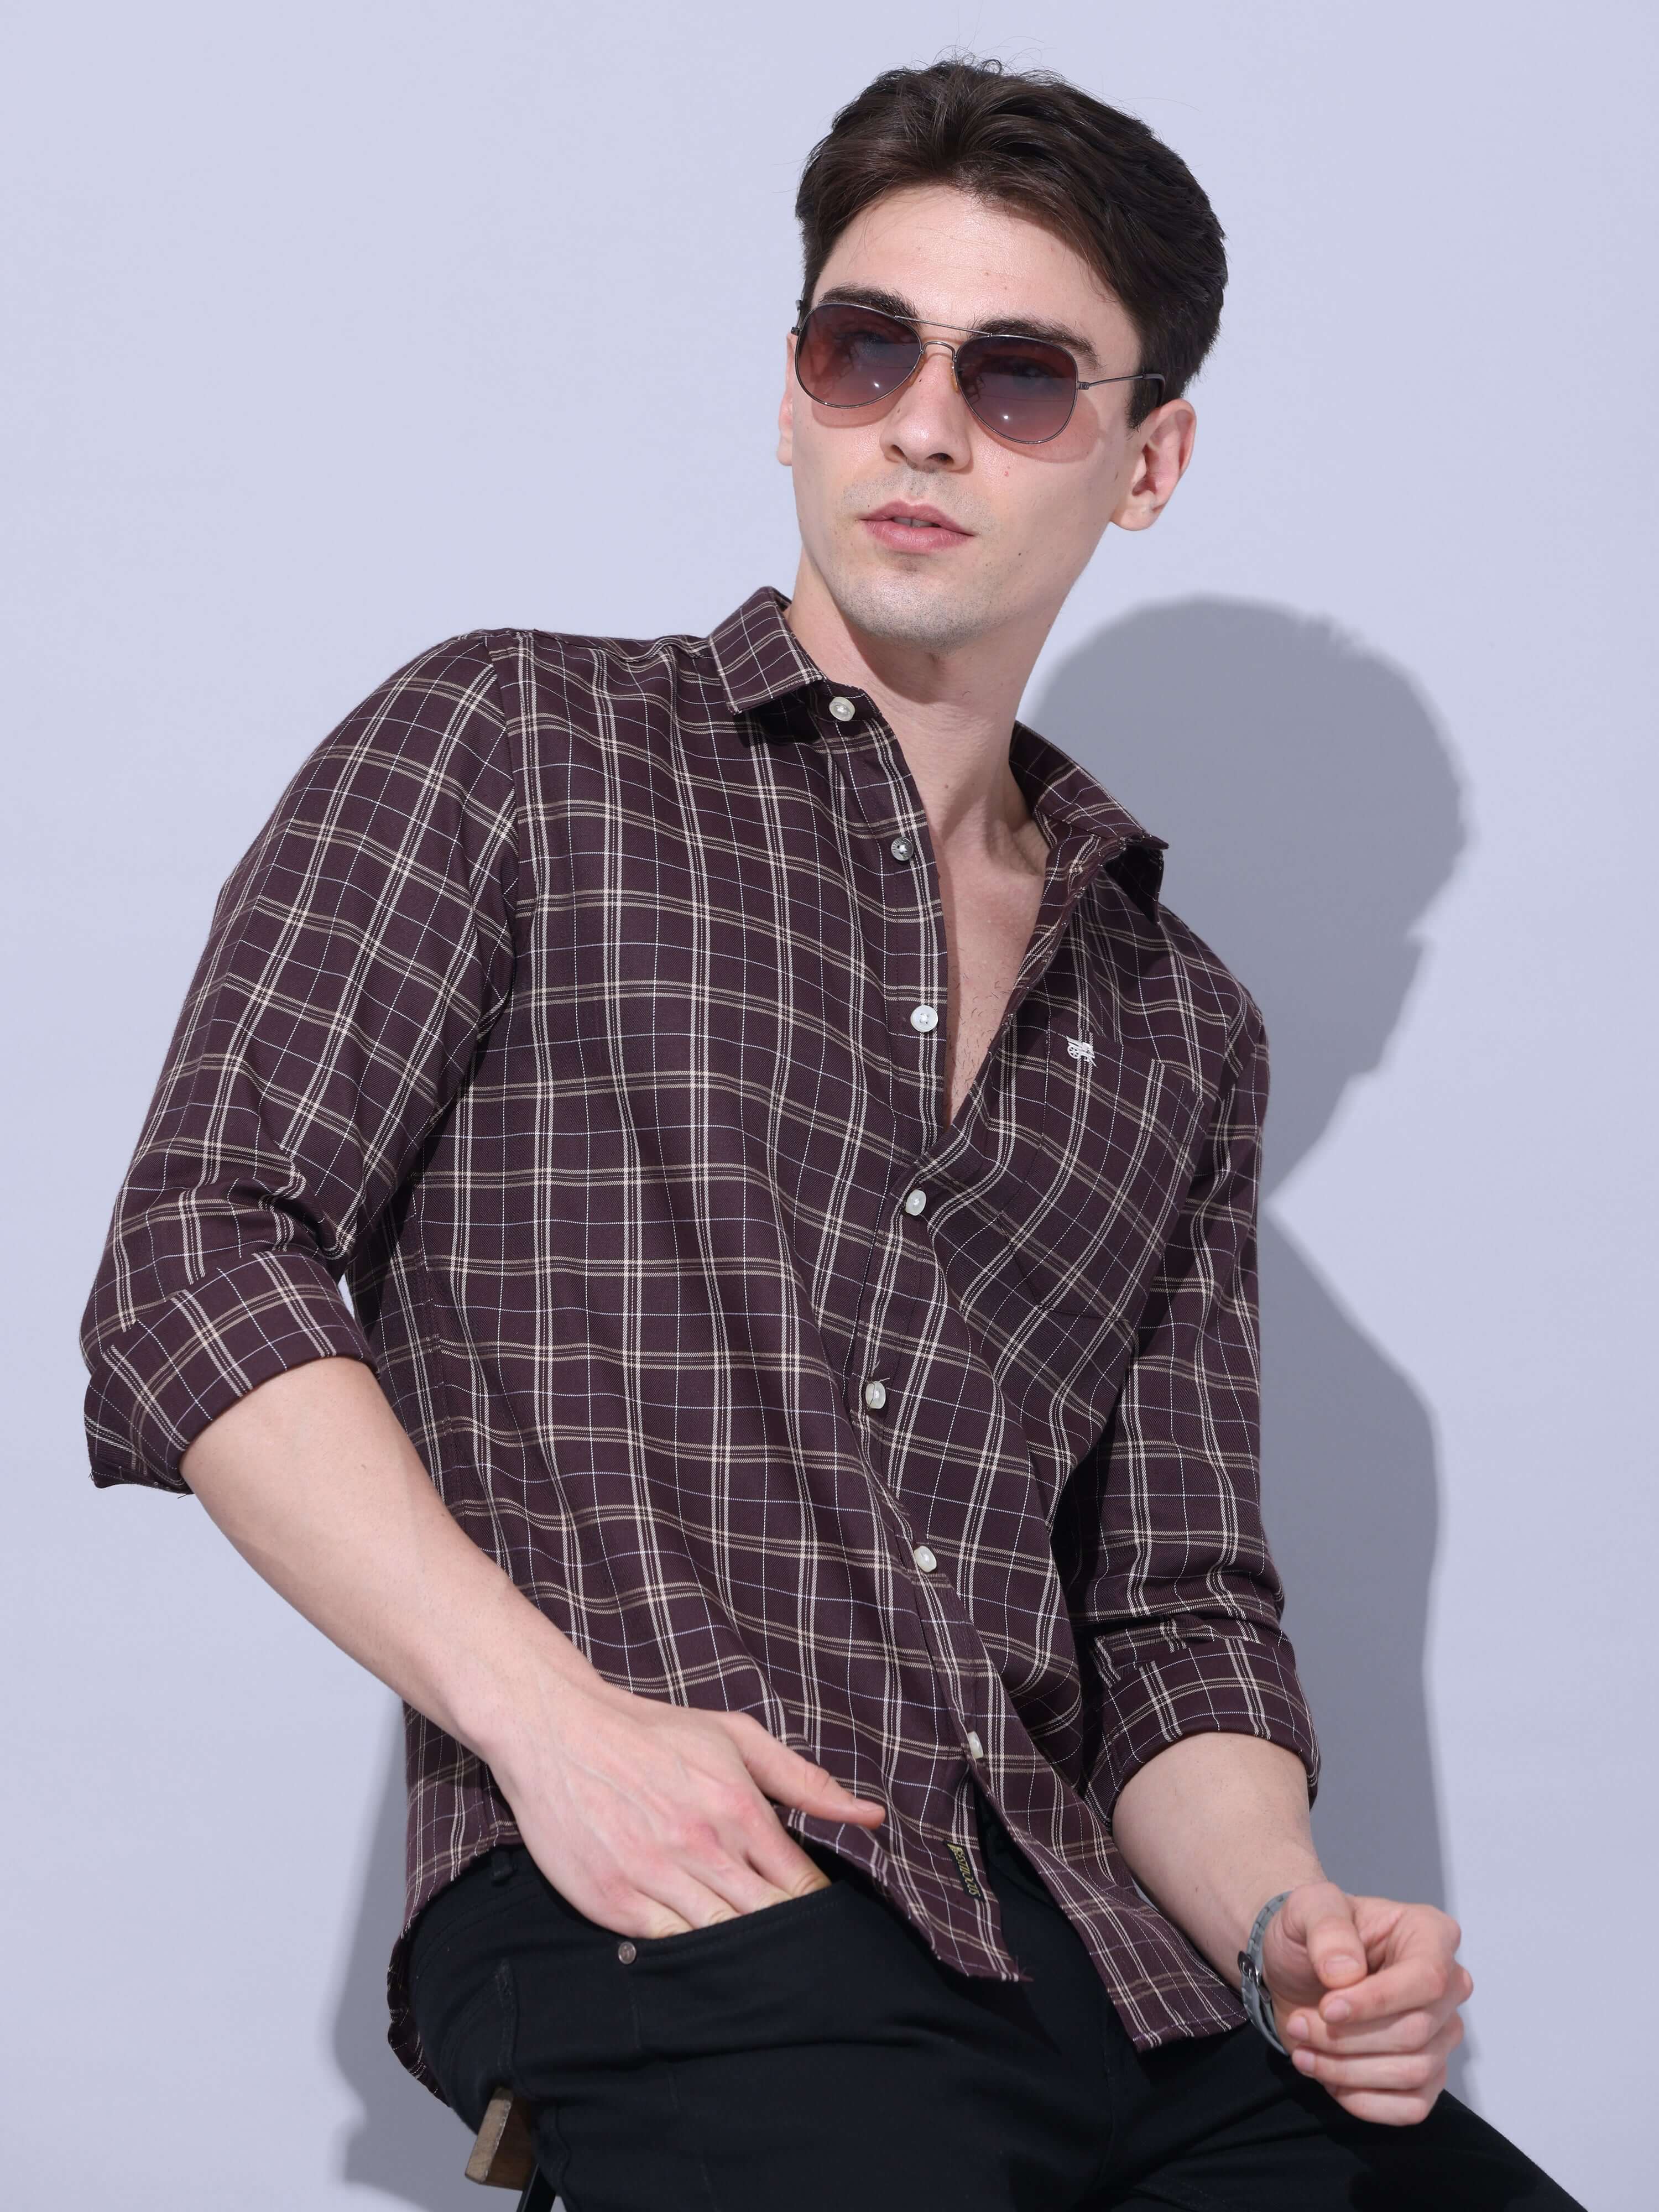 Brown Checks Casual Shirt shop online at Estilocus. • Full-sleeve check shirt • Cut and sew placket • Regular collar • Double button square cuff. • Single pocket with logo embroidery • Curved hemline • Finest quality sewing • Machine wash care • Suitable